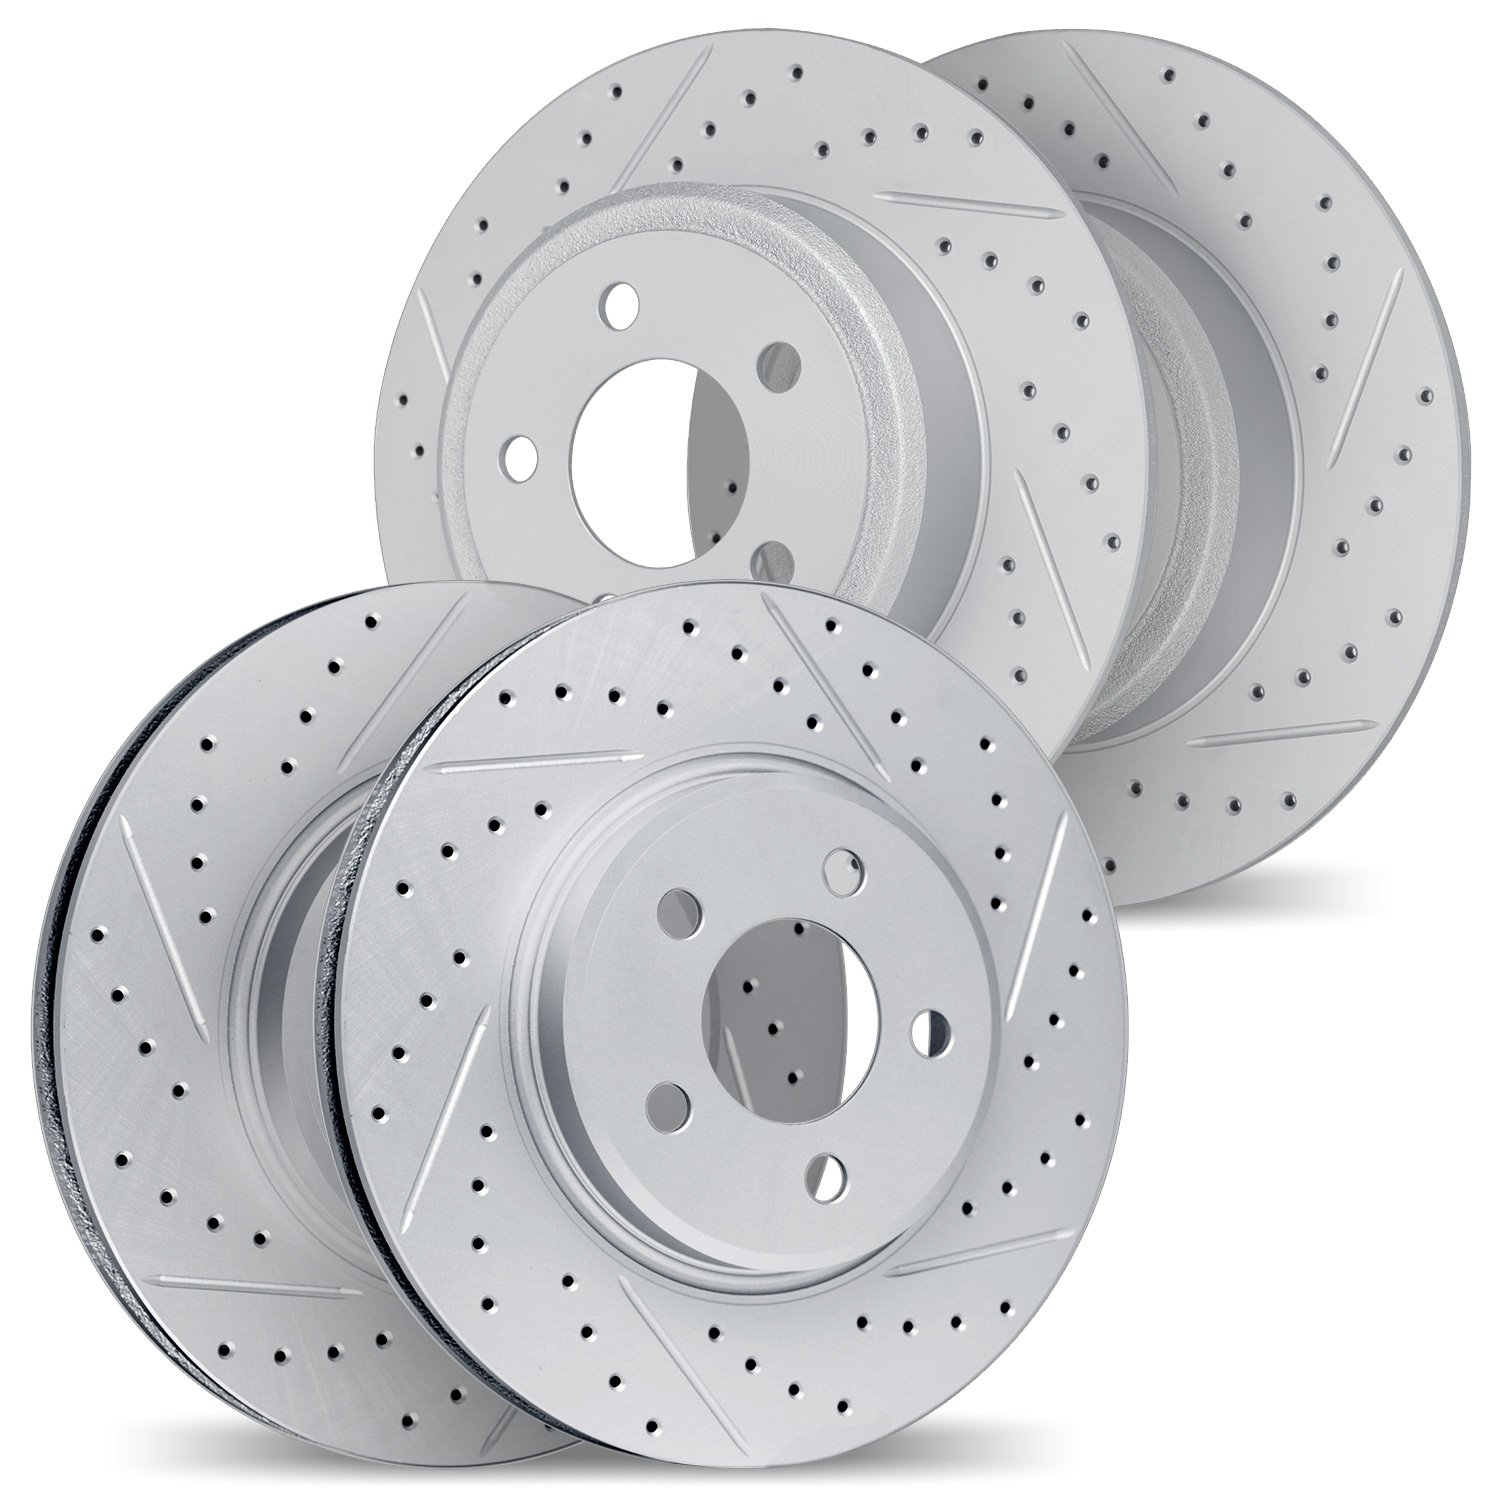 2004-76064 Geoperformance Drilled/Slotted Brake Rotors, 2004-2005 Lexus/Toyota/Scion, Position: Front and Rear